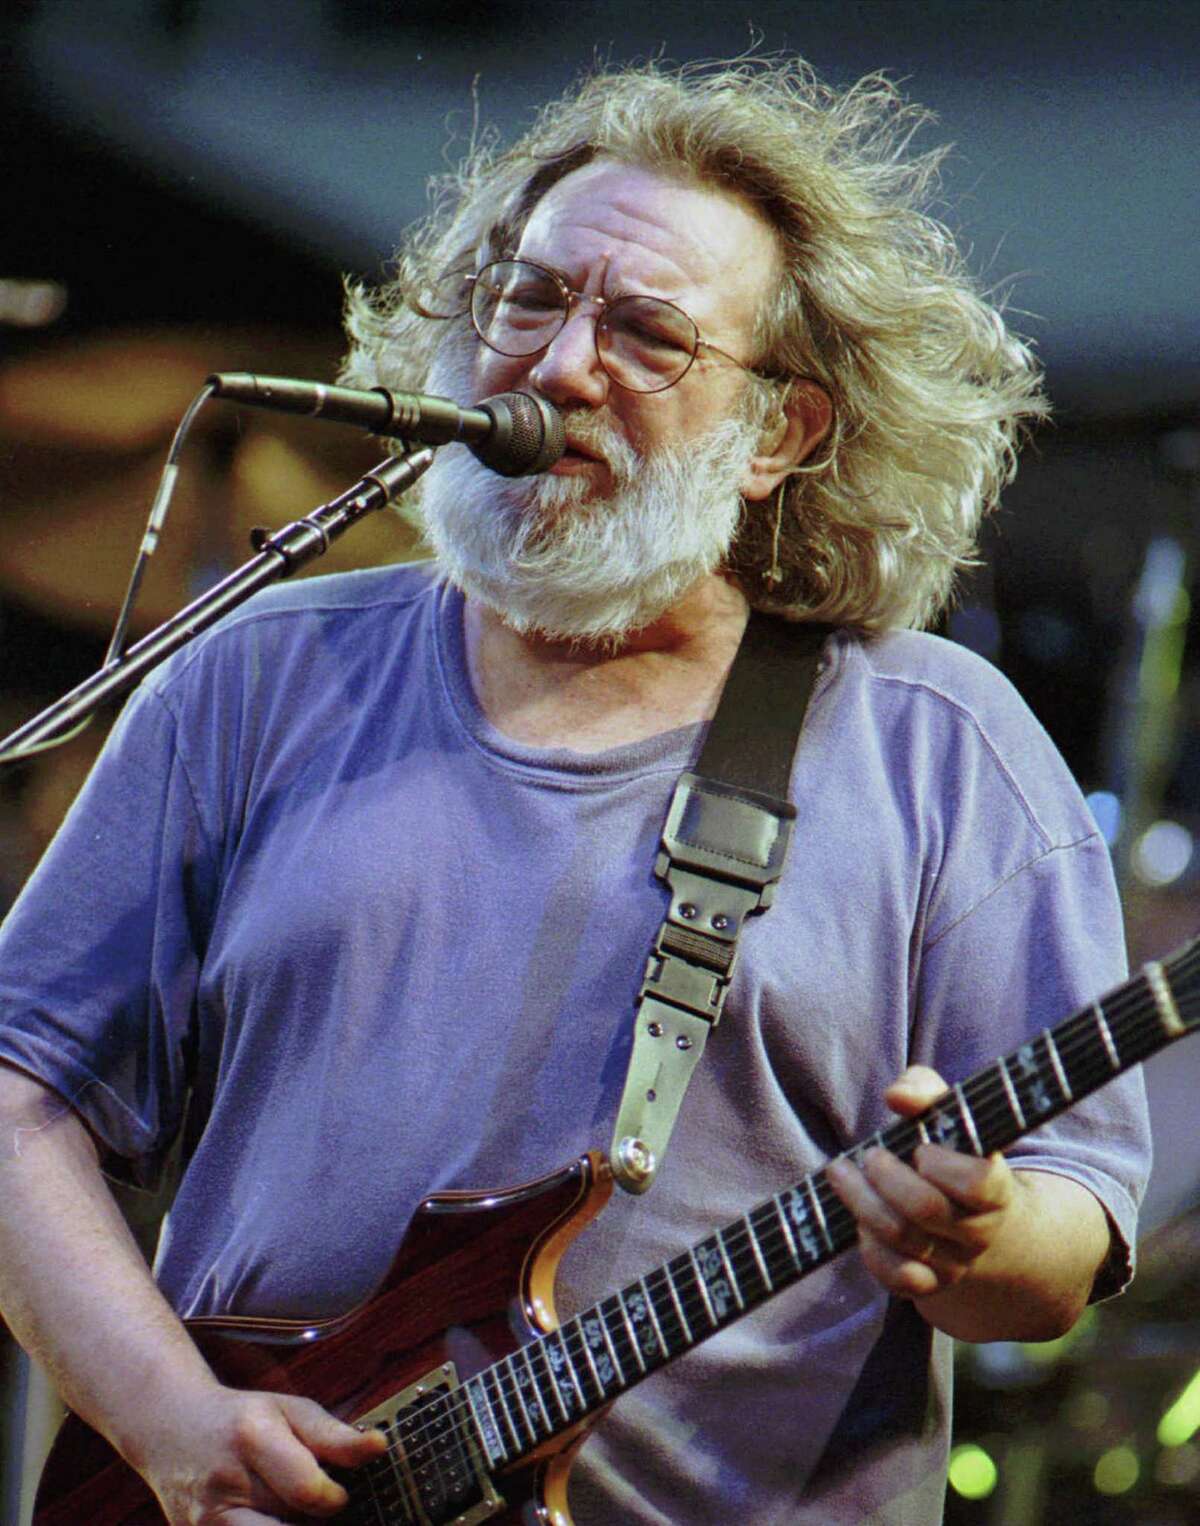 The biggest attendance for a single show at SPAC was Grateful Dead, 40,231 in 1985. Attendance is now capped at 25,000.